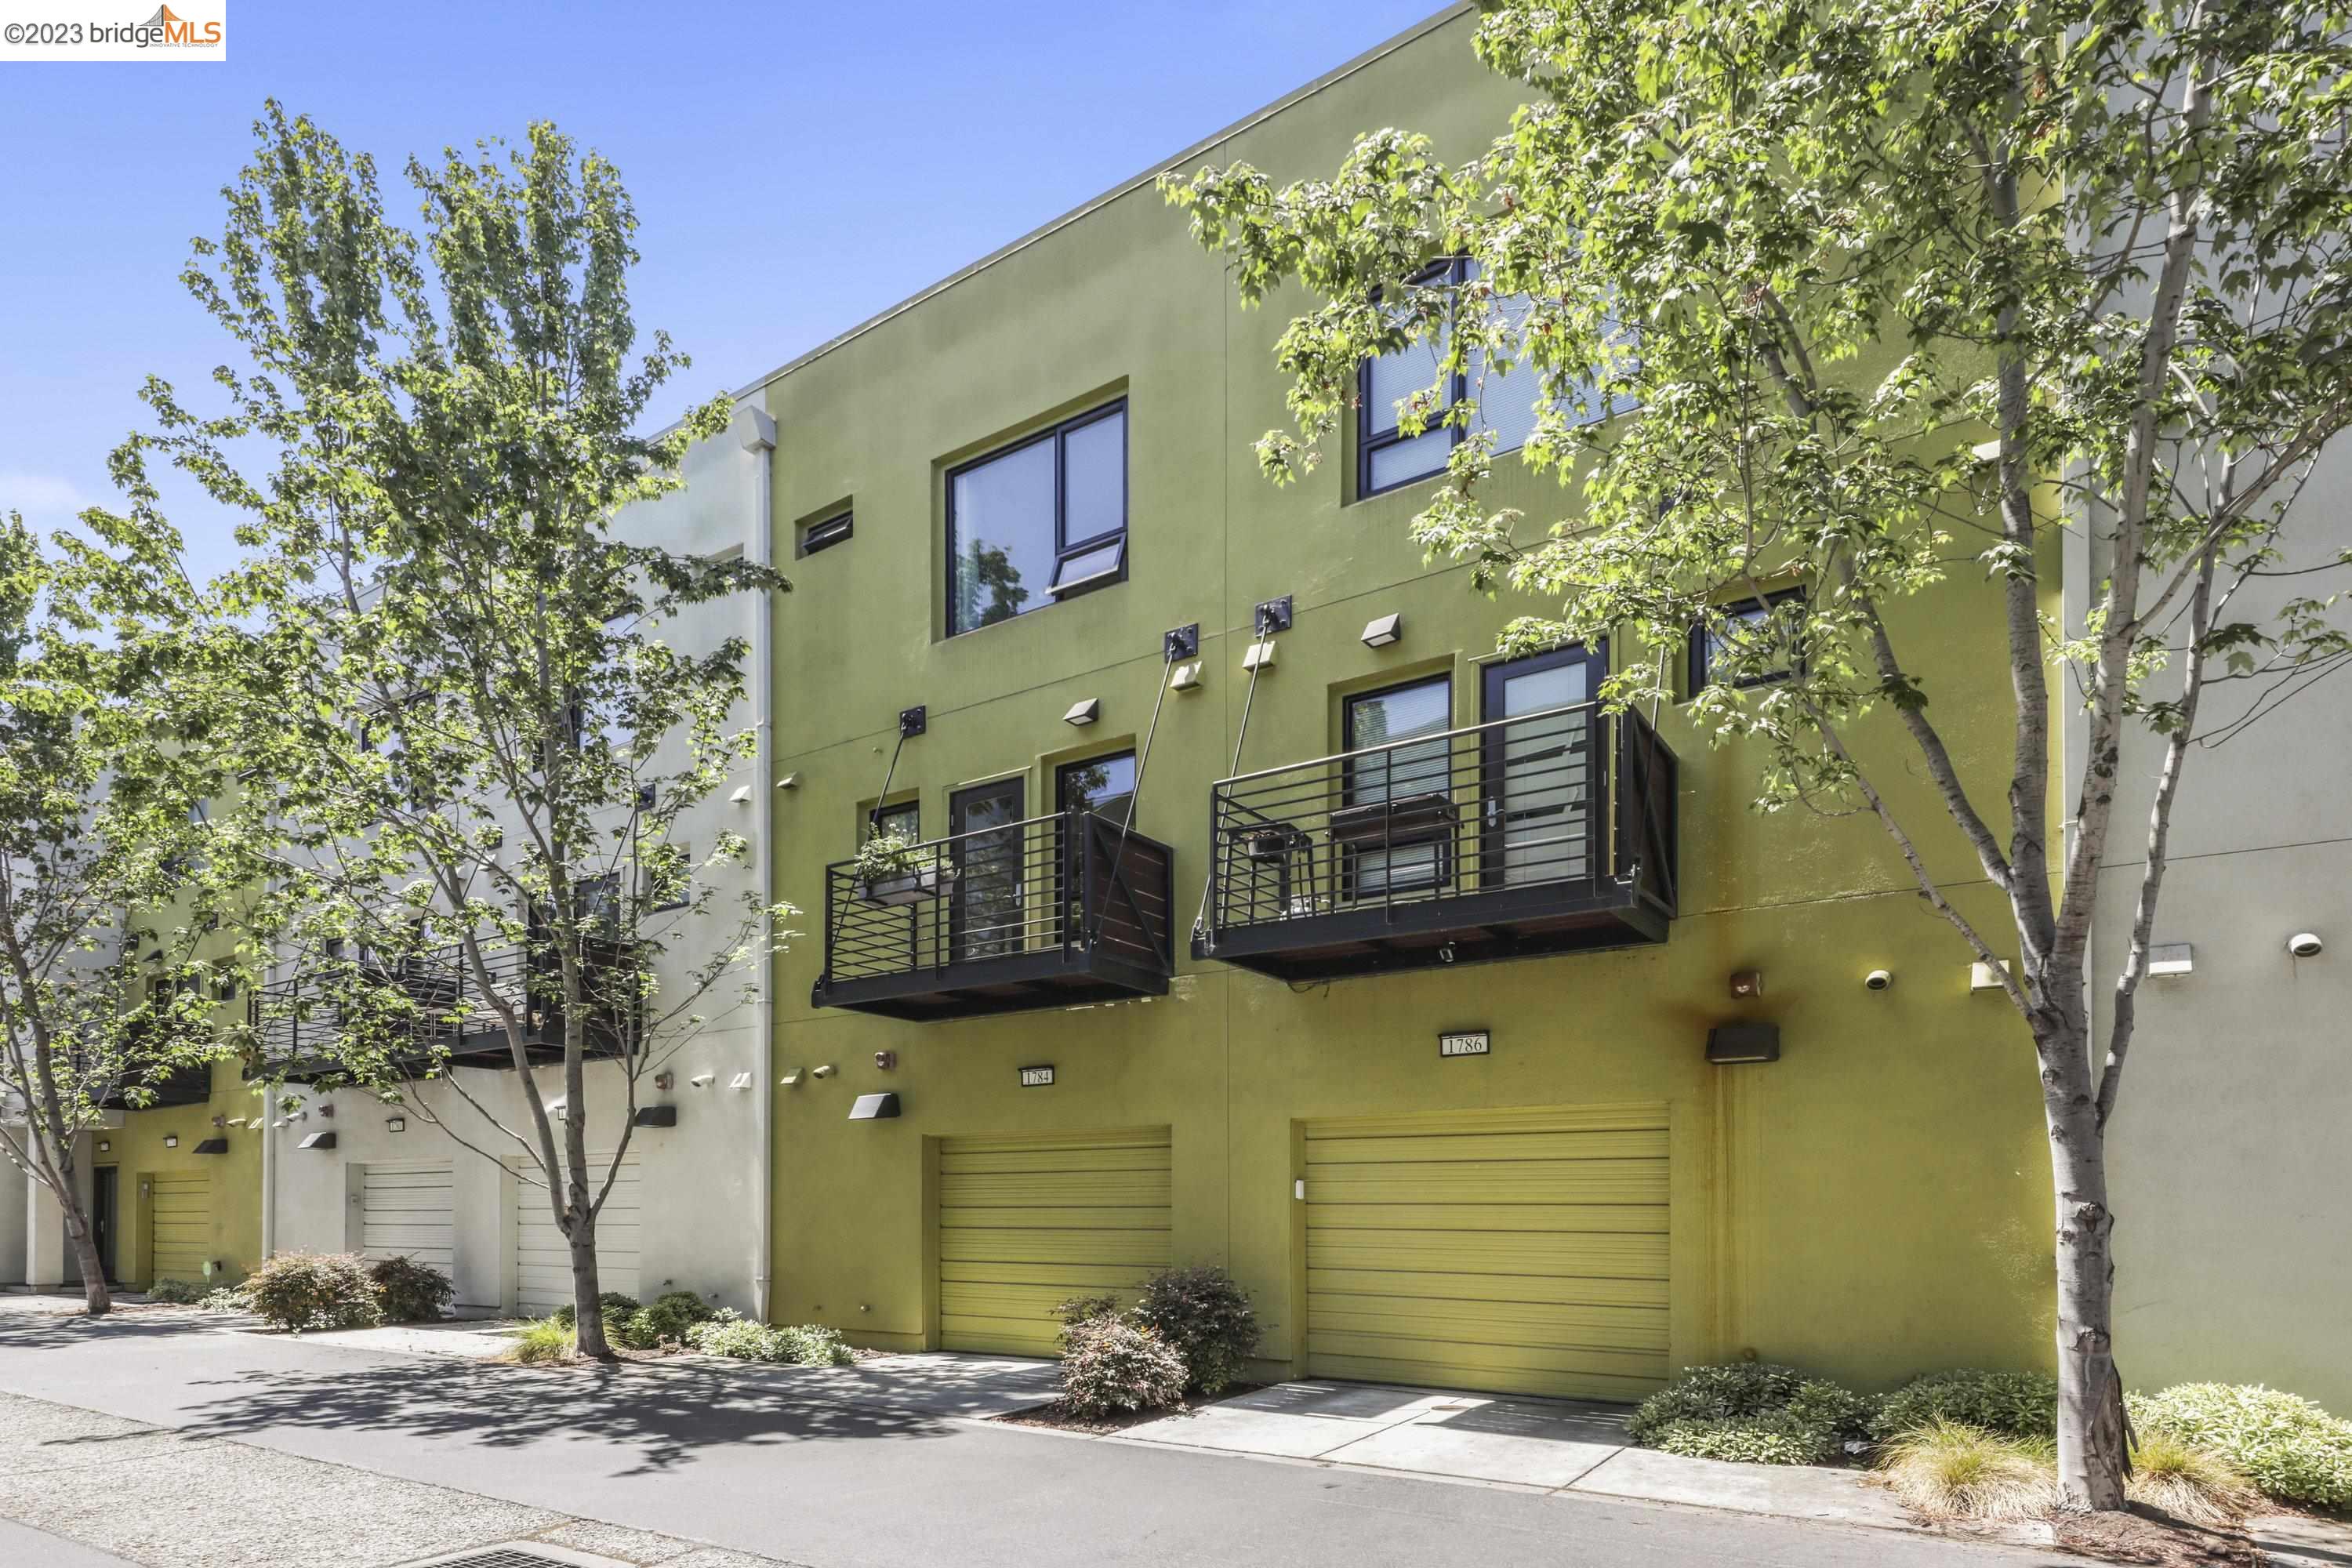 *Open House: Sunday, March 19th 2-4PM!* Nestled within the Zephyr Gate Complex in West Oakland is this bright and modern townhouse-style condominium that will impress even the most astute buyer. With three levels of living and contemporary finishes throughout, this is your chance to treat yourself to all the space and luxury you deserve without compromising on that easy-care lifestyle so many crave. The ground level is home to a two-car tandem garage, with interior access and a side-by-side washer and dryer in the laundry space. Upstairs, a light-filled and open-plan living space awaits with high ceilings overhead and beautiful bamboo flooring. A gorgeous kitchen, with a suite of stainless steel appliances and sweeping granite countertops, will appeal to those who love to cook and there is a door that opens out to a balcony with a leafy outlook. The third level is where you will find the two beautiful master bedrooms, both with new carpet underfoot, plus ample closet space and ensuite baths for added comfort and convenience. There is a 1/2 bath on the mid-level, too, while a hall closet completes this impressive property. There are low HOA dues and West Oakland BART, highways and Bay Bridge are minutes away and you can enjoy easy access to the Oakland Ferry Terminal.